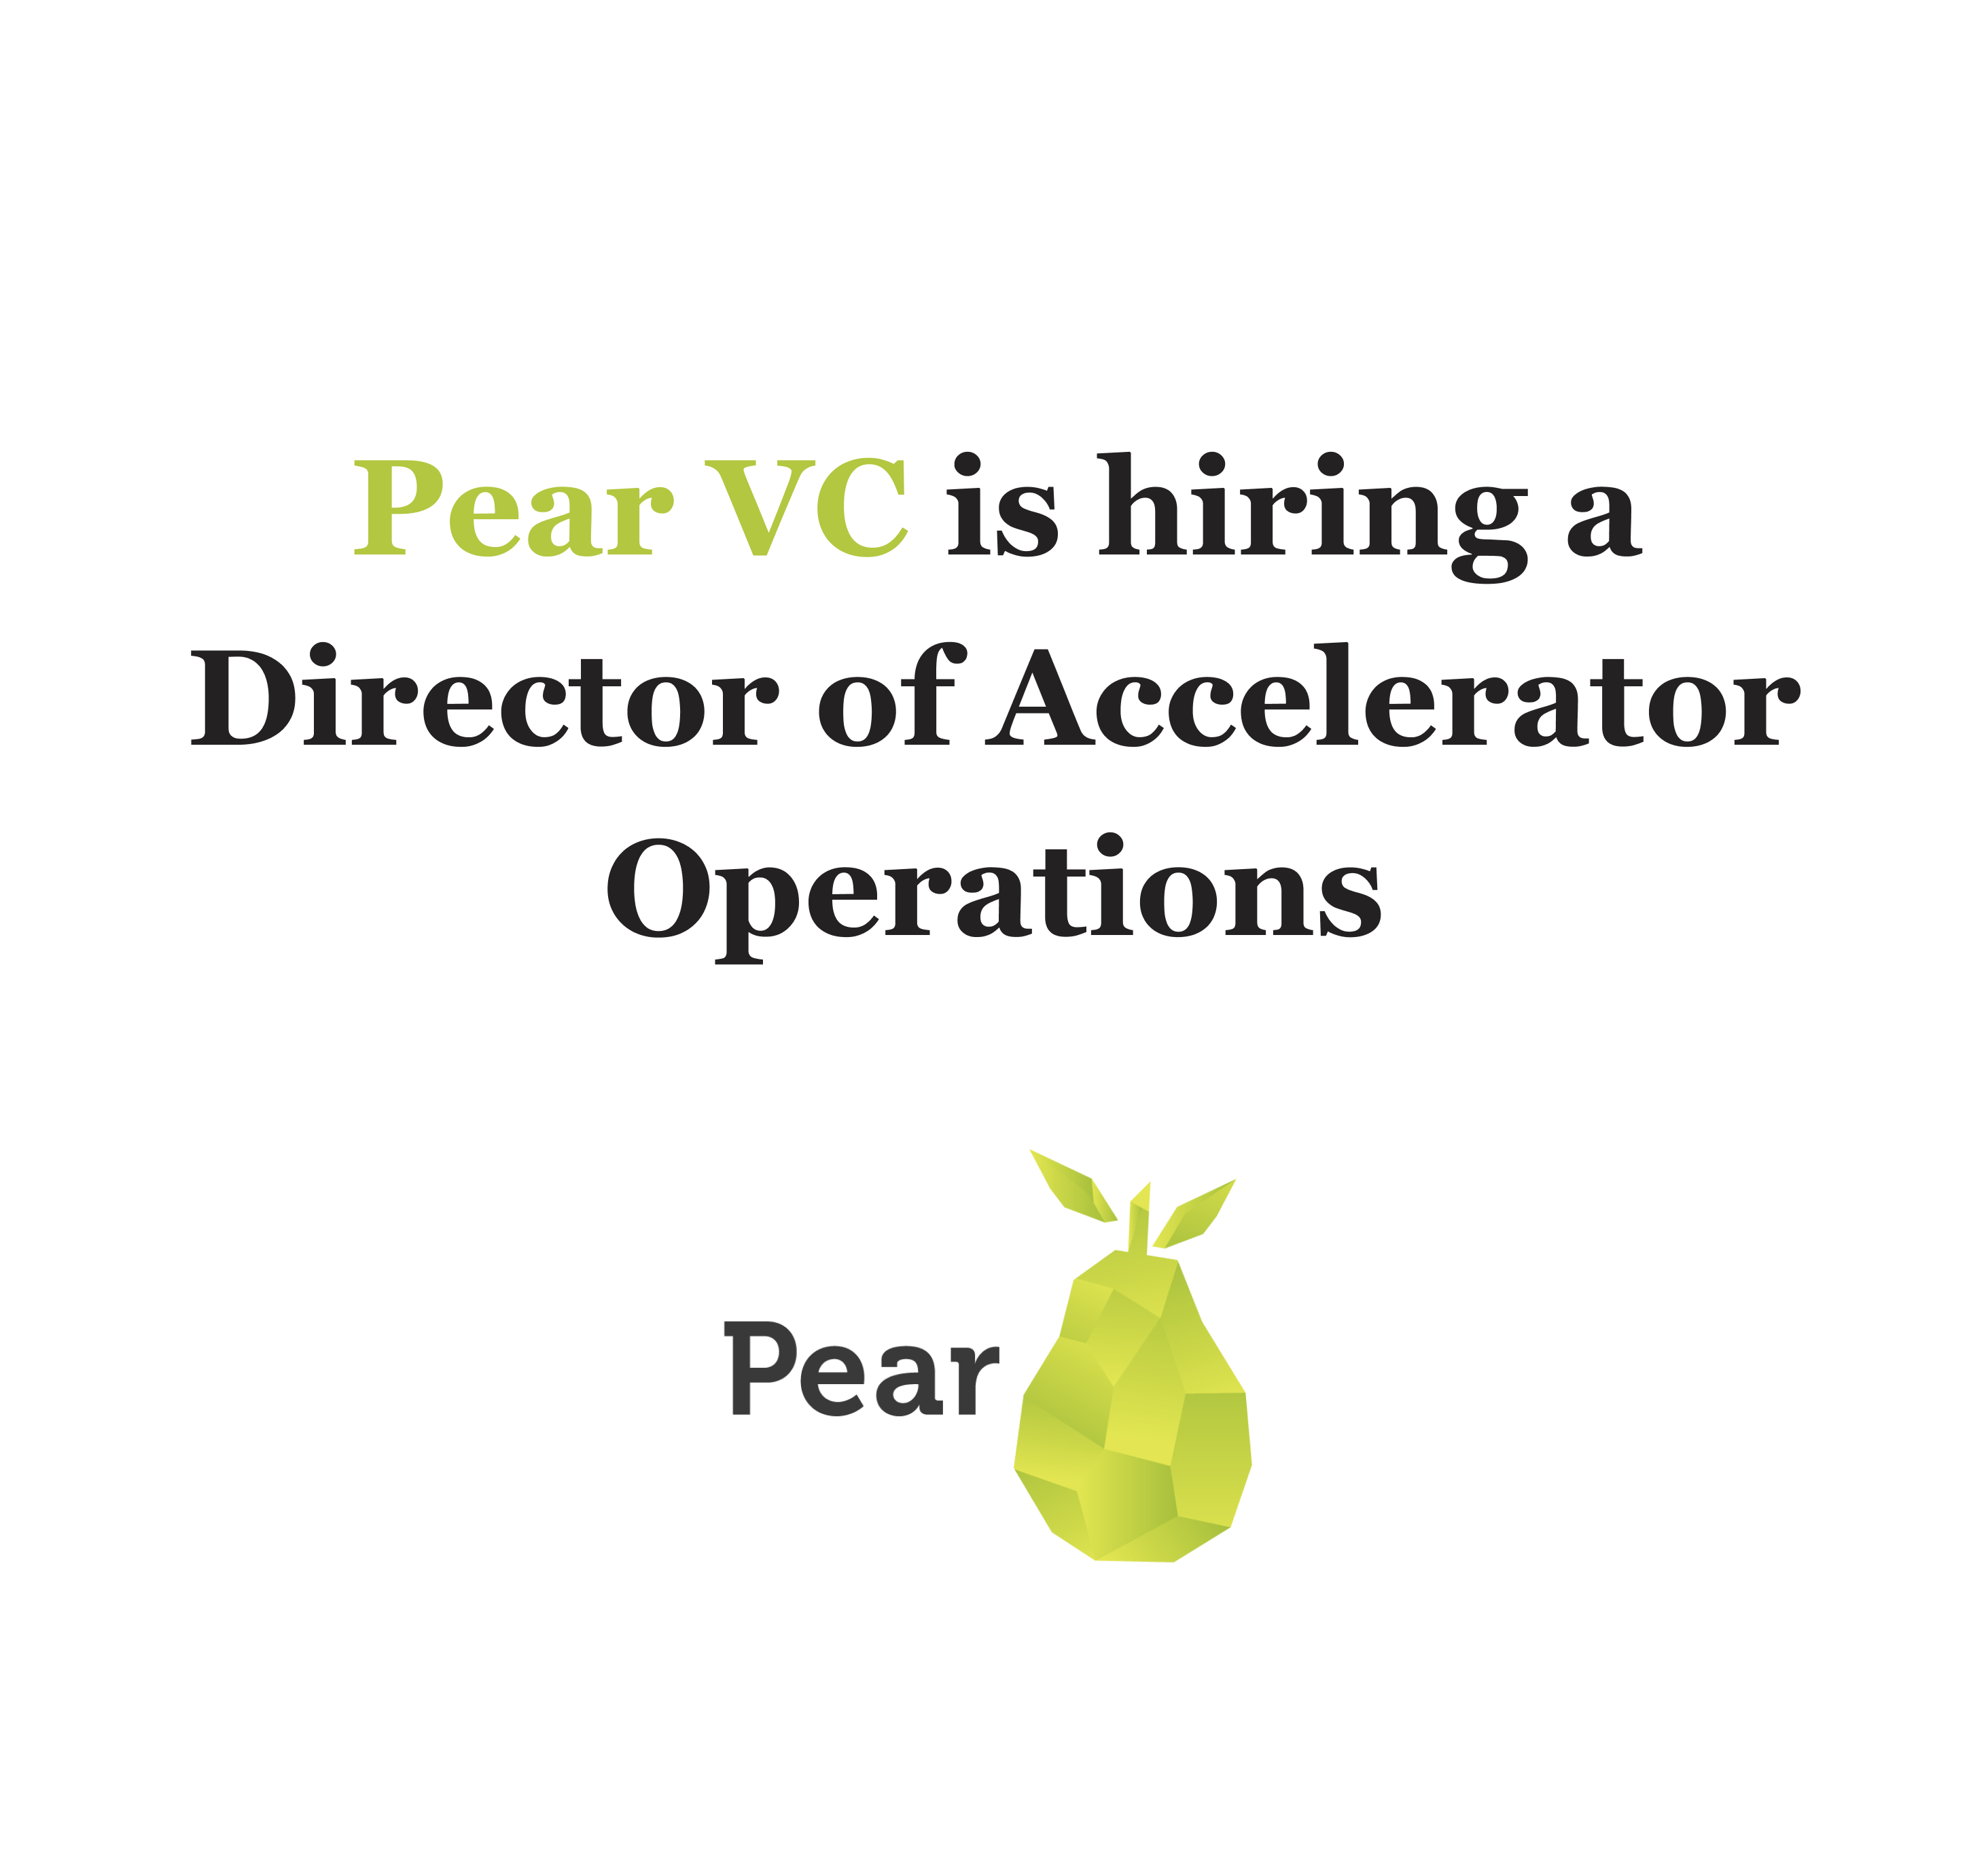 resources Come join Pear as our Director of Accelerator Operations!